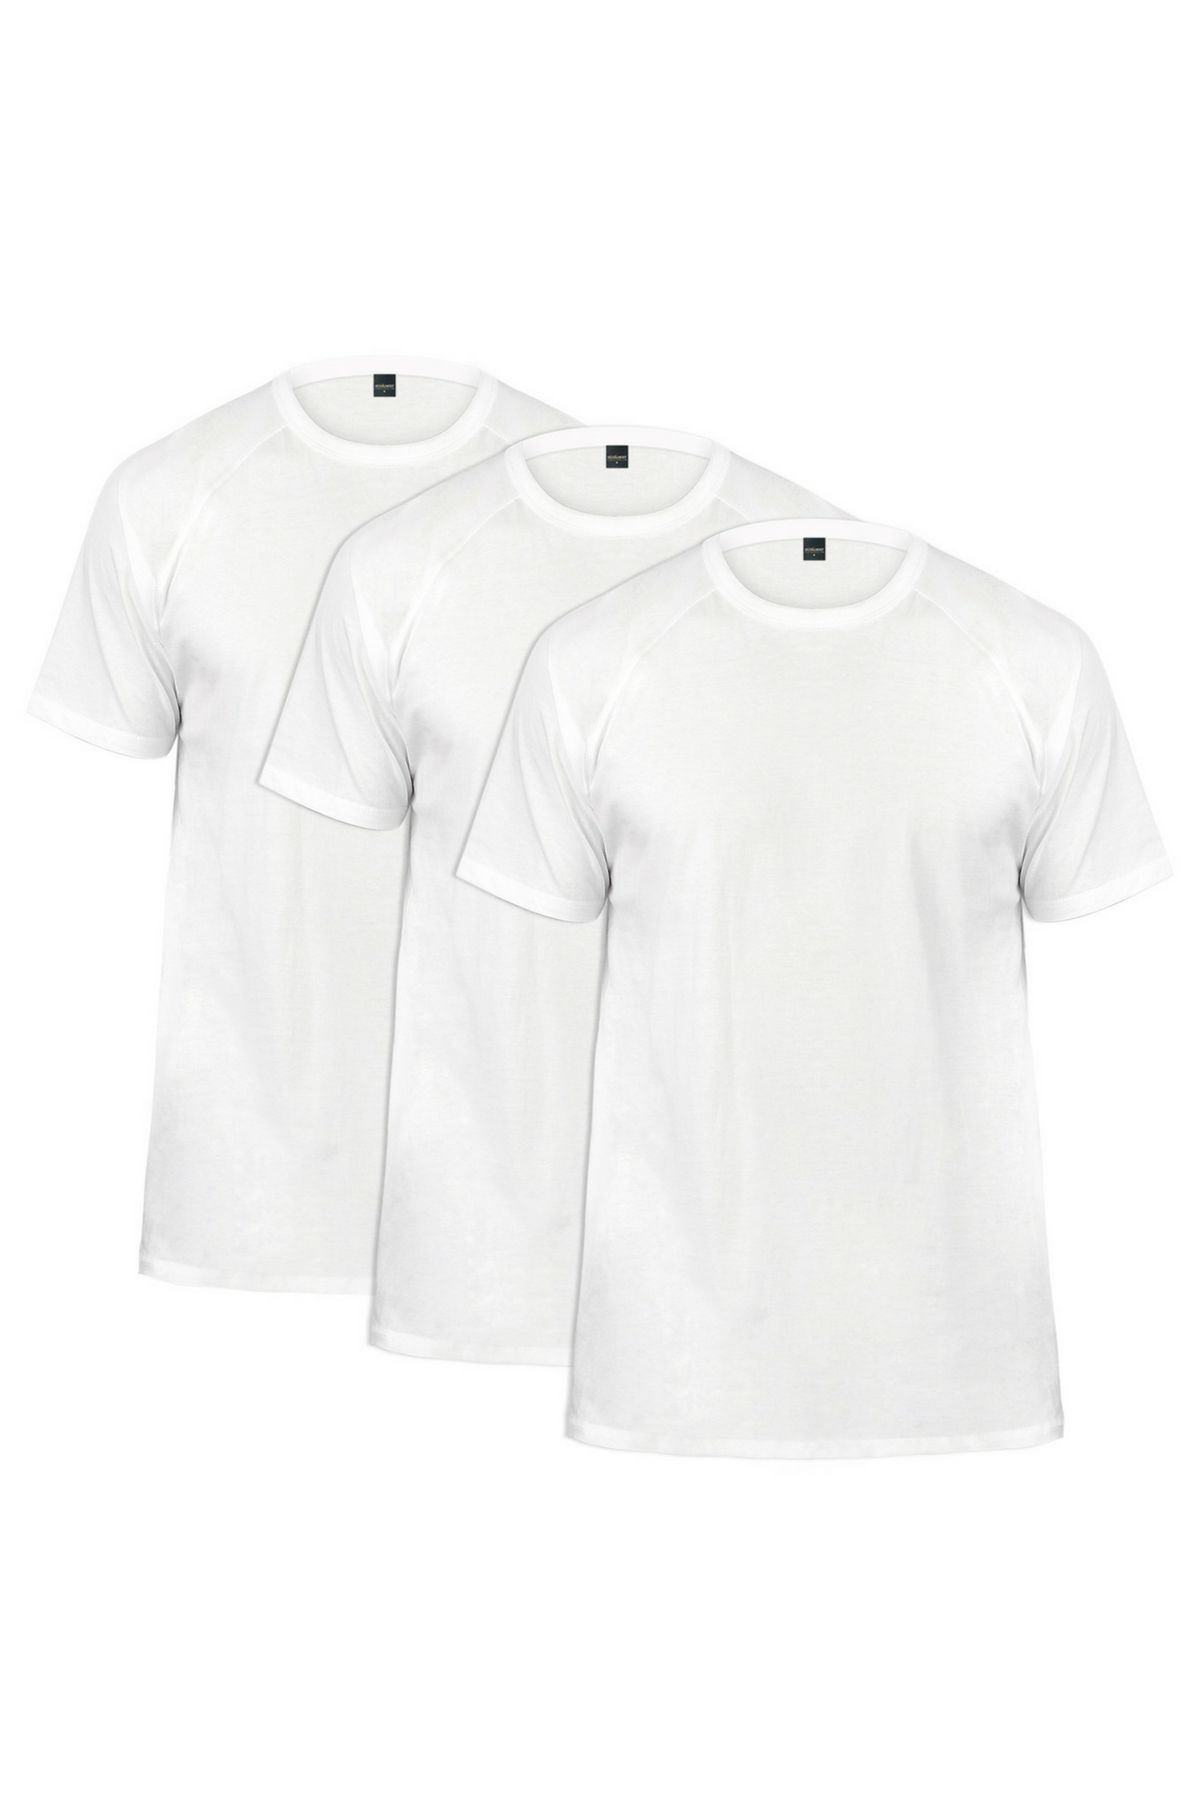 pack of white tees